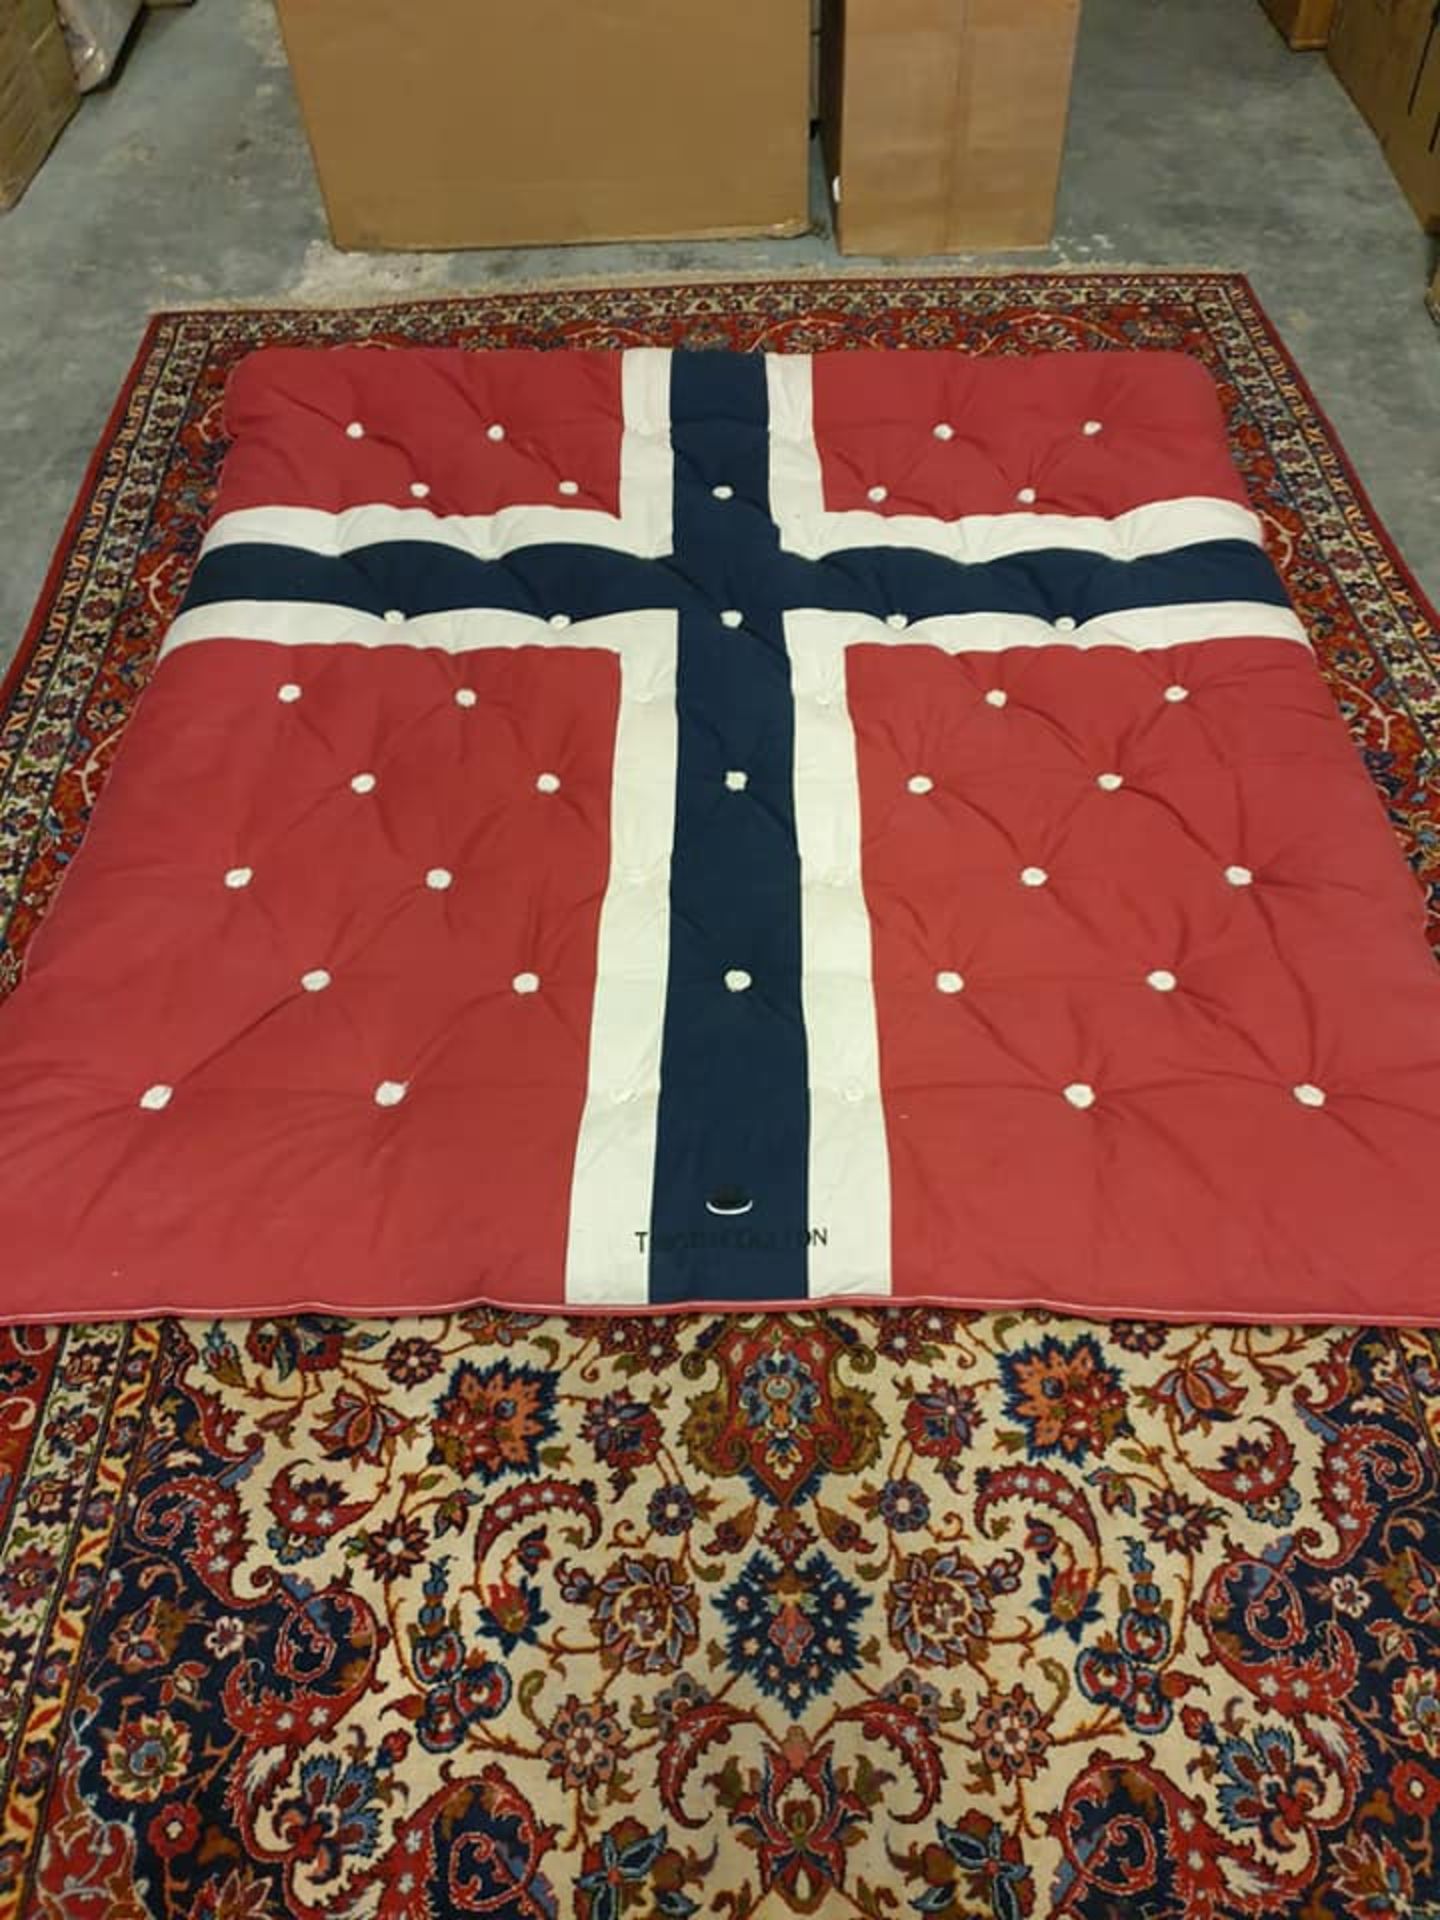 Timothy Oulton Perpetual bedding collection Norway Flag Mattress Topper 190 x 190cm RRP 1860 - Image 2 of 3